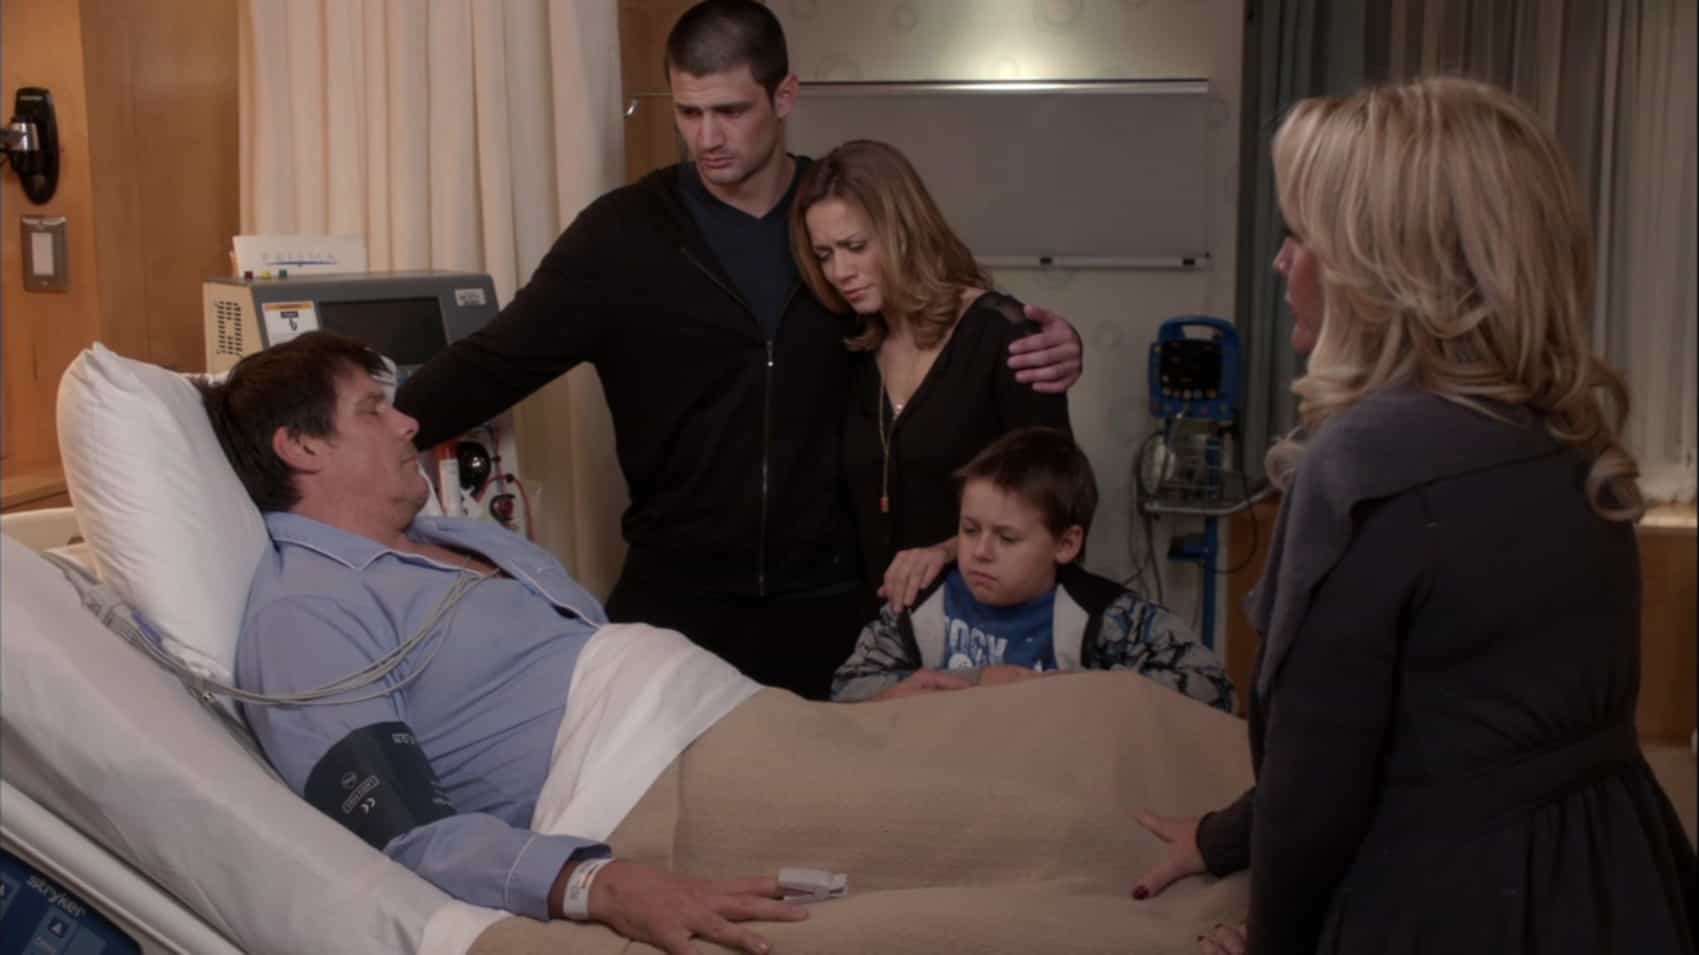 A family stands around a man's deathbed in a hospital in this image from Tollin/Robbins Productions.